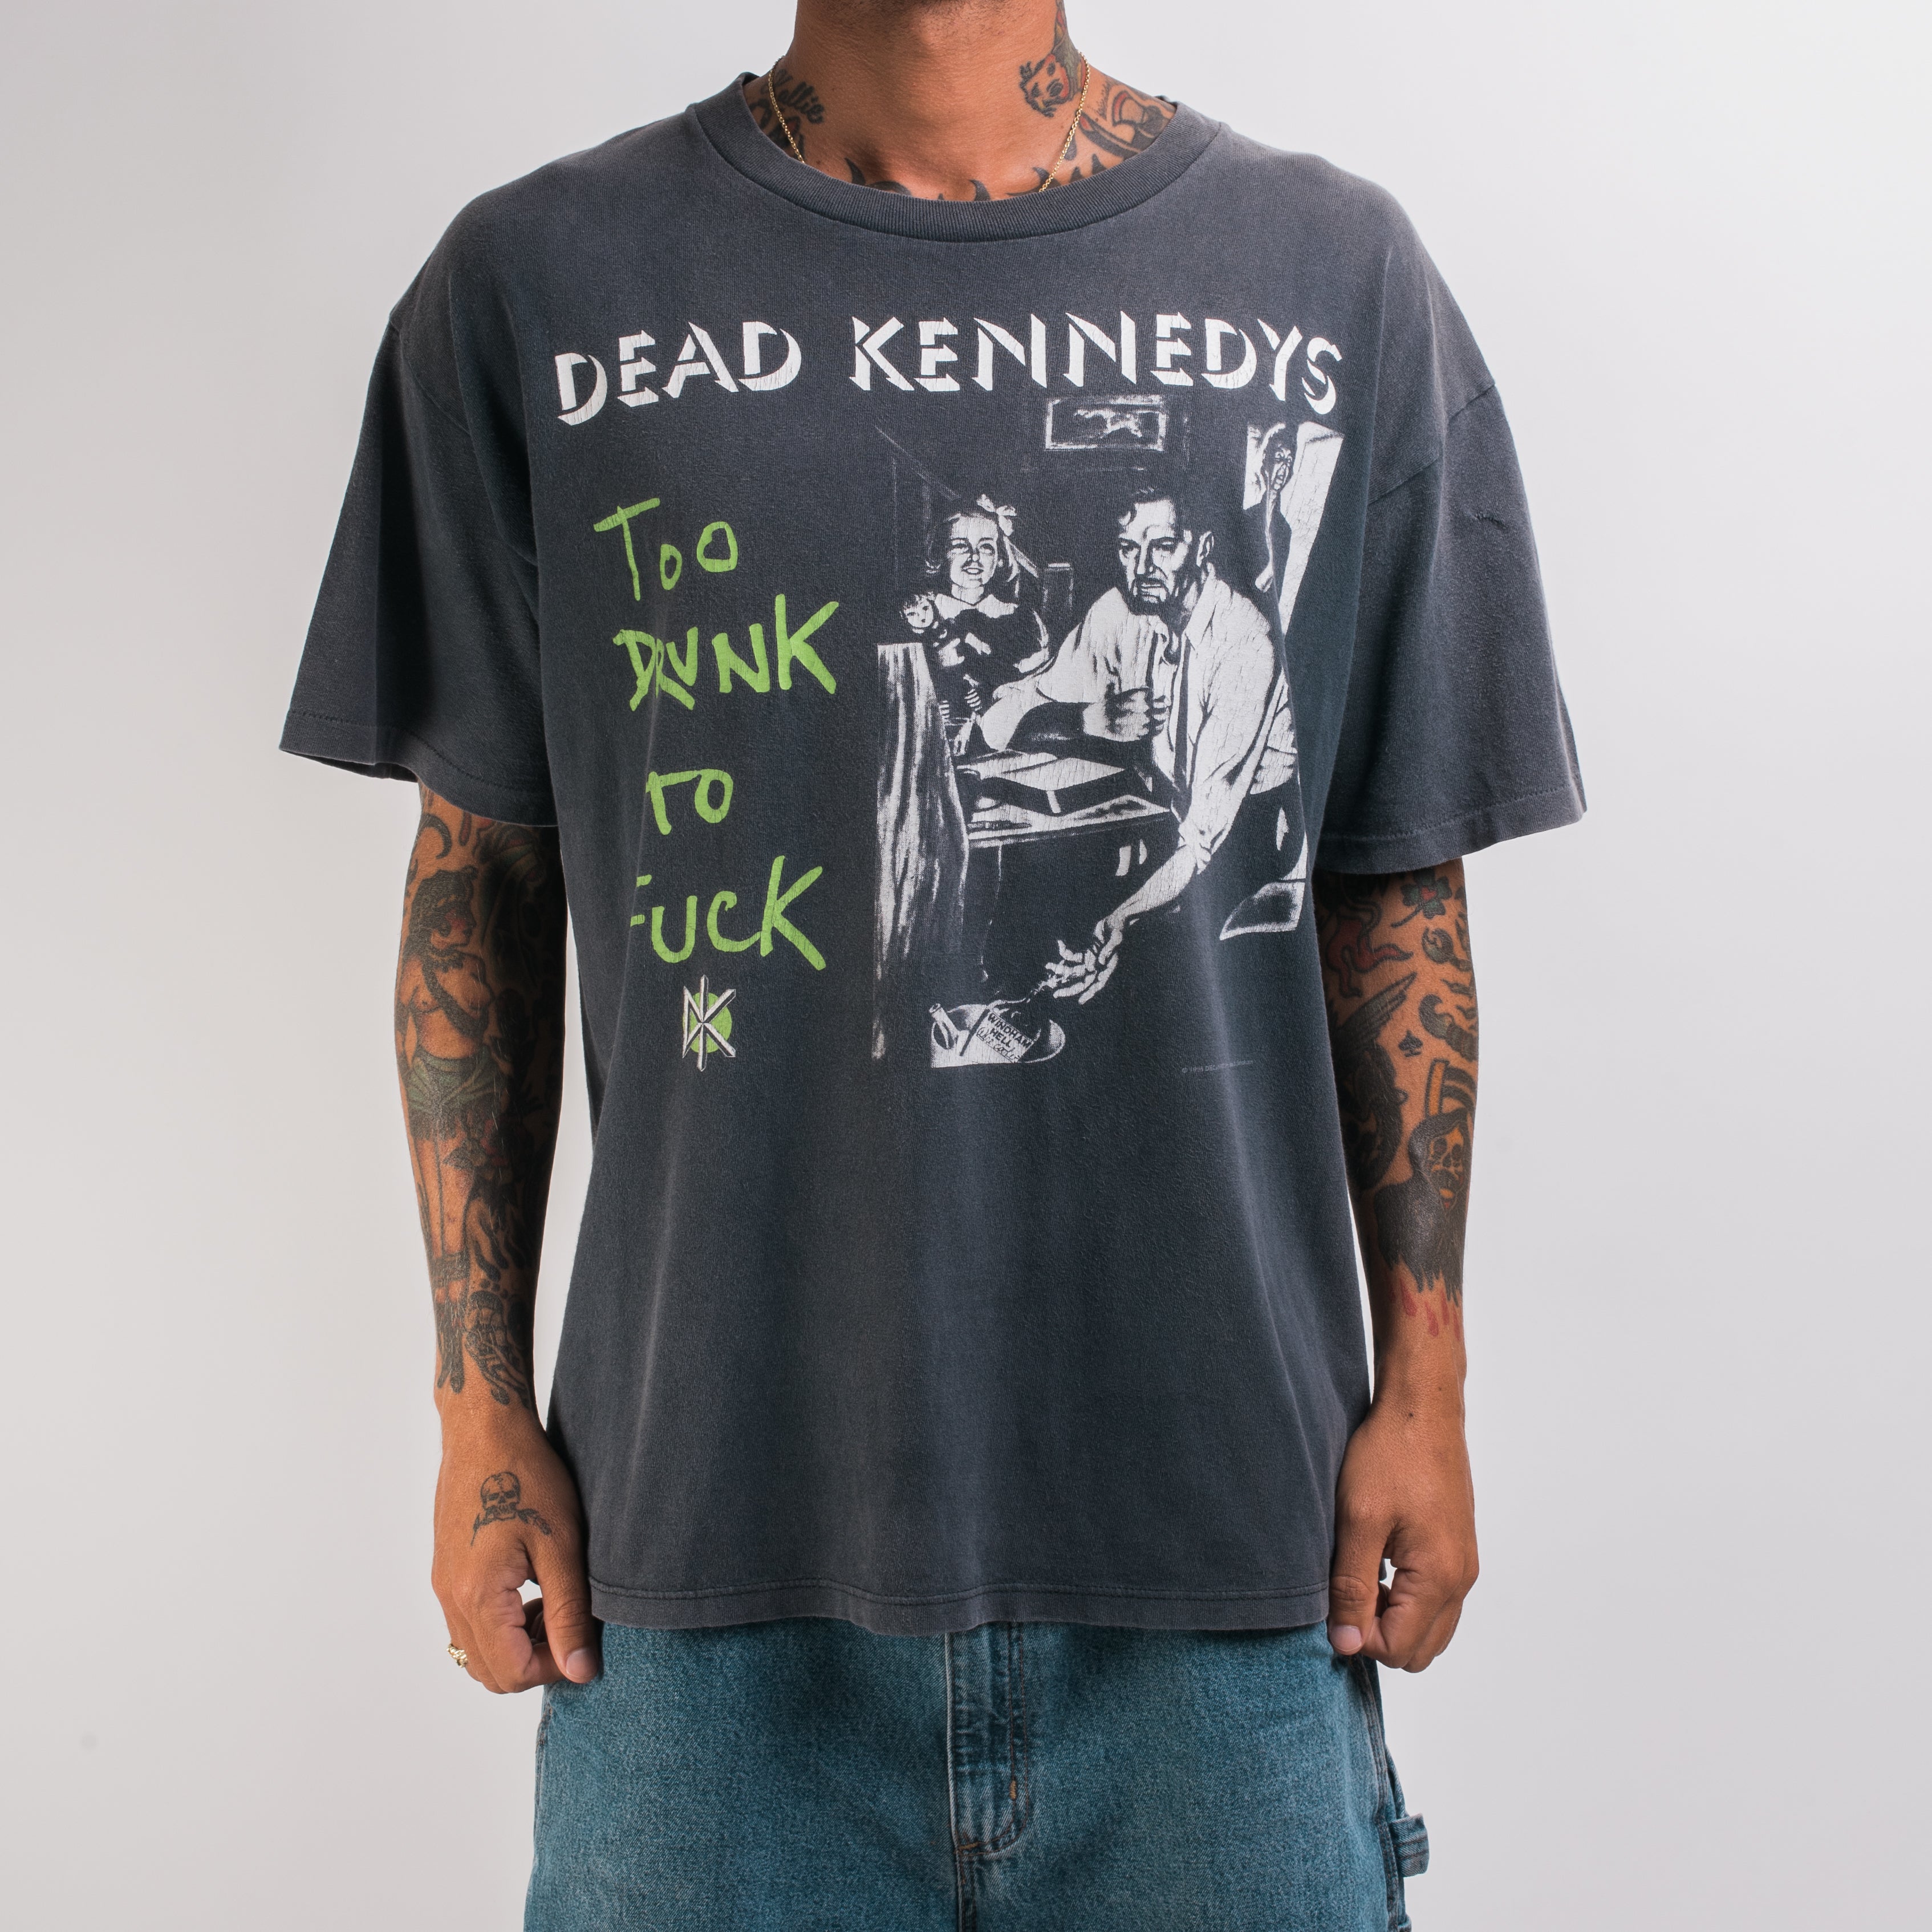 Vintage 1995 Dead Kennedy's Too Drunk To Fuck T-Shirt – Mills